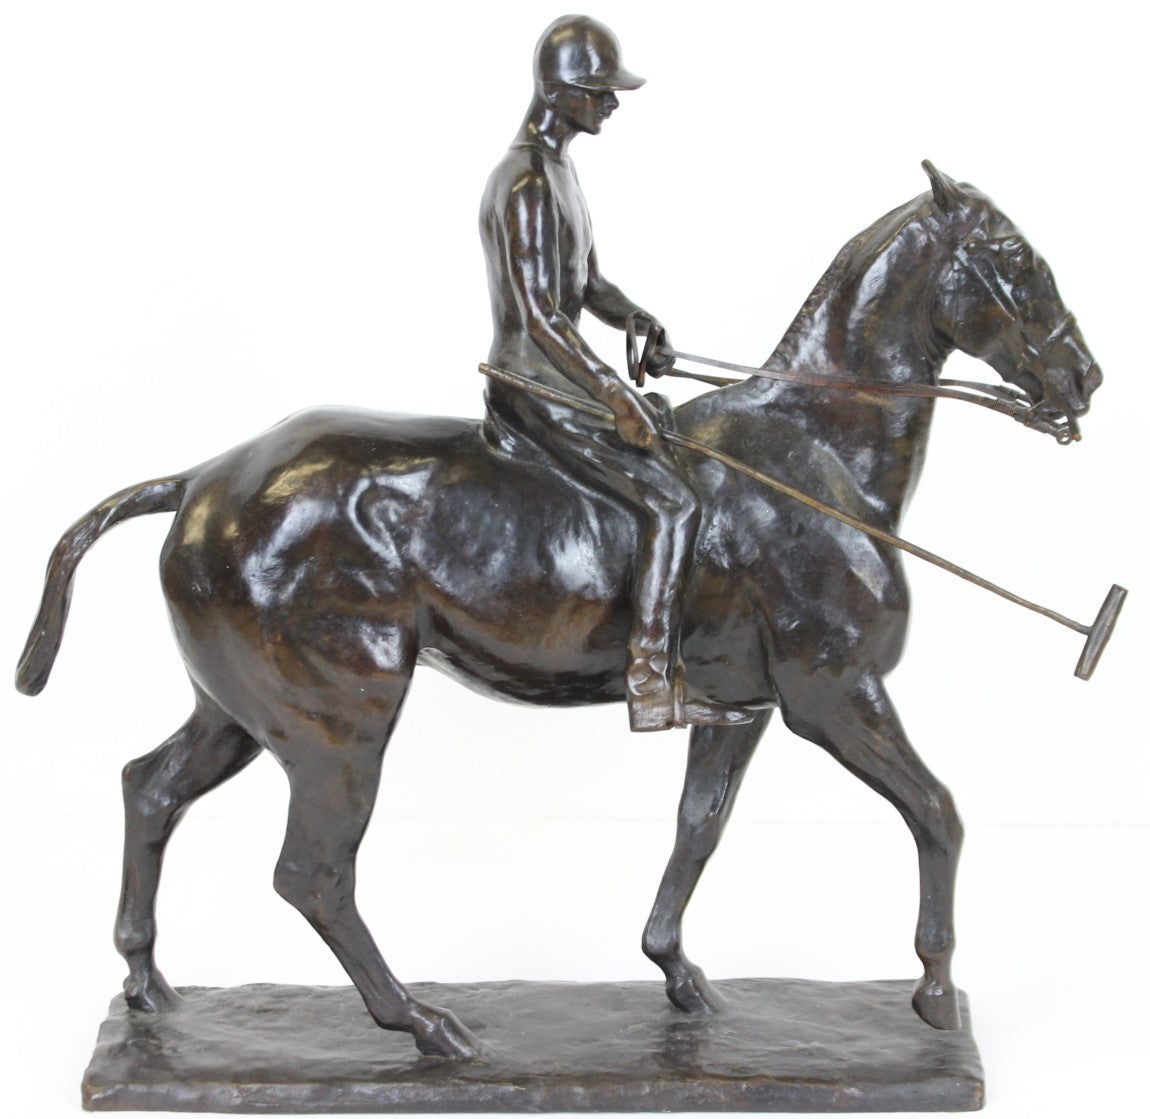 American Polo Player, John R. Fell on Pony (SOLD)